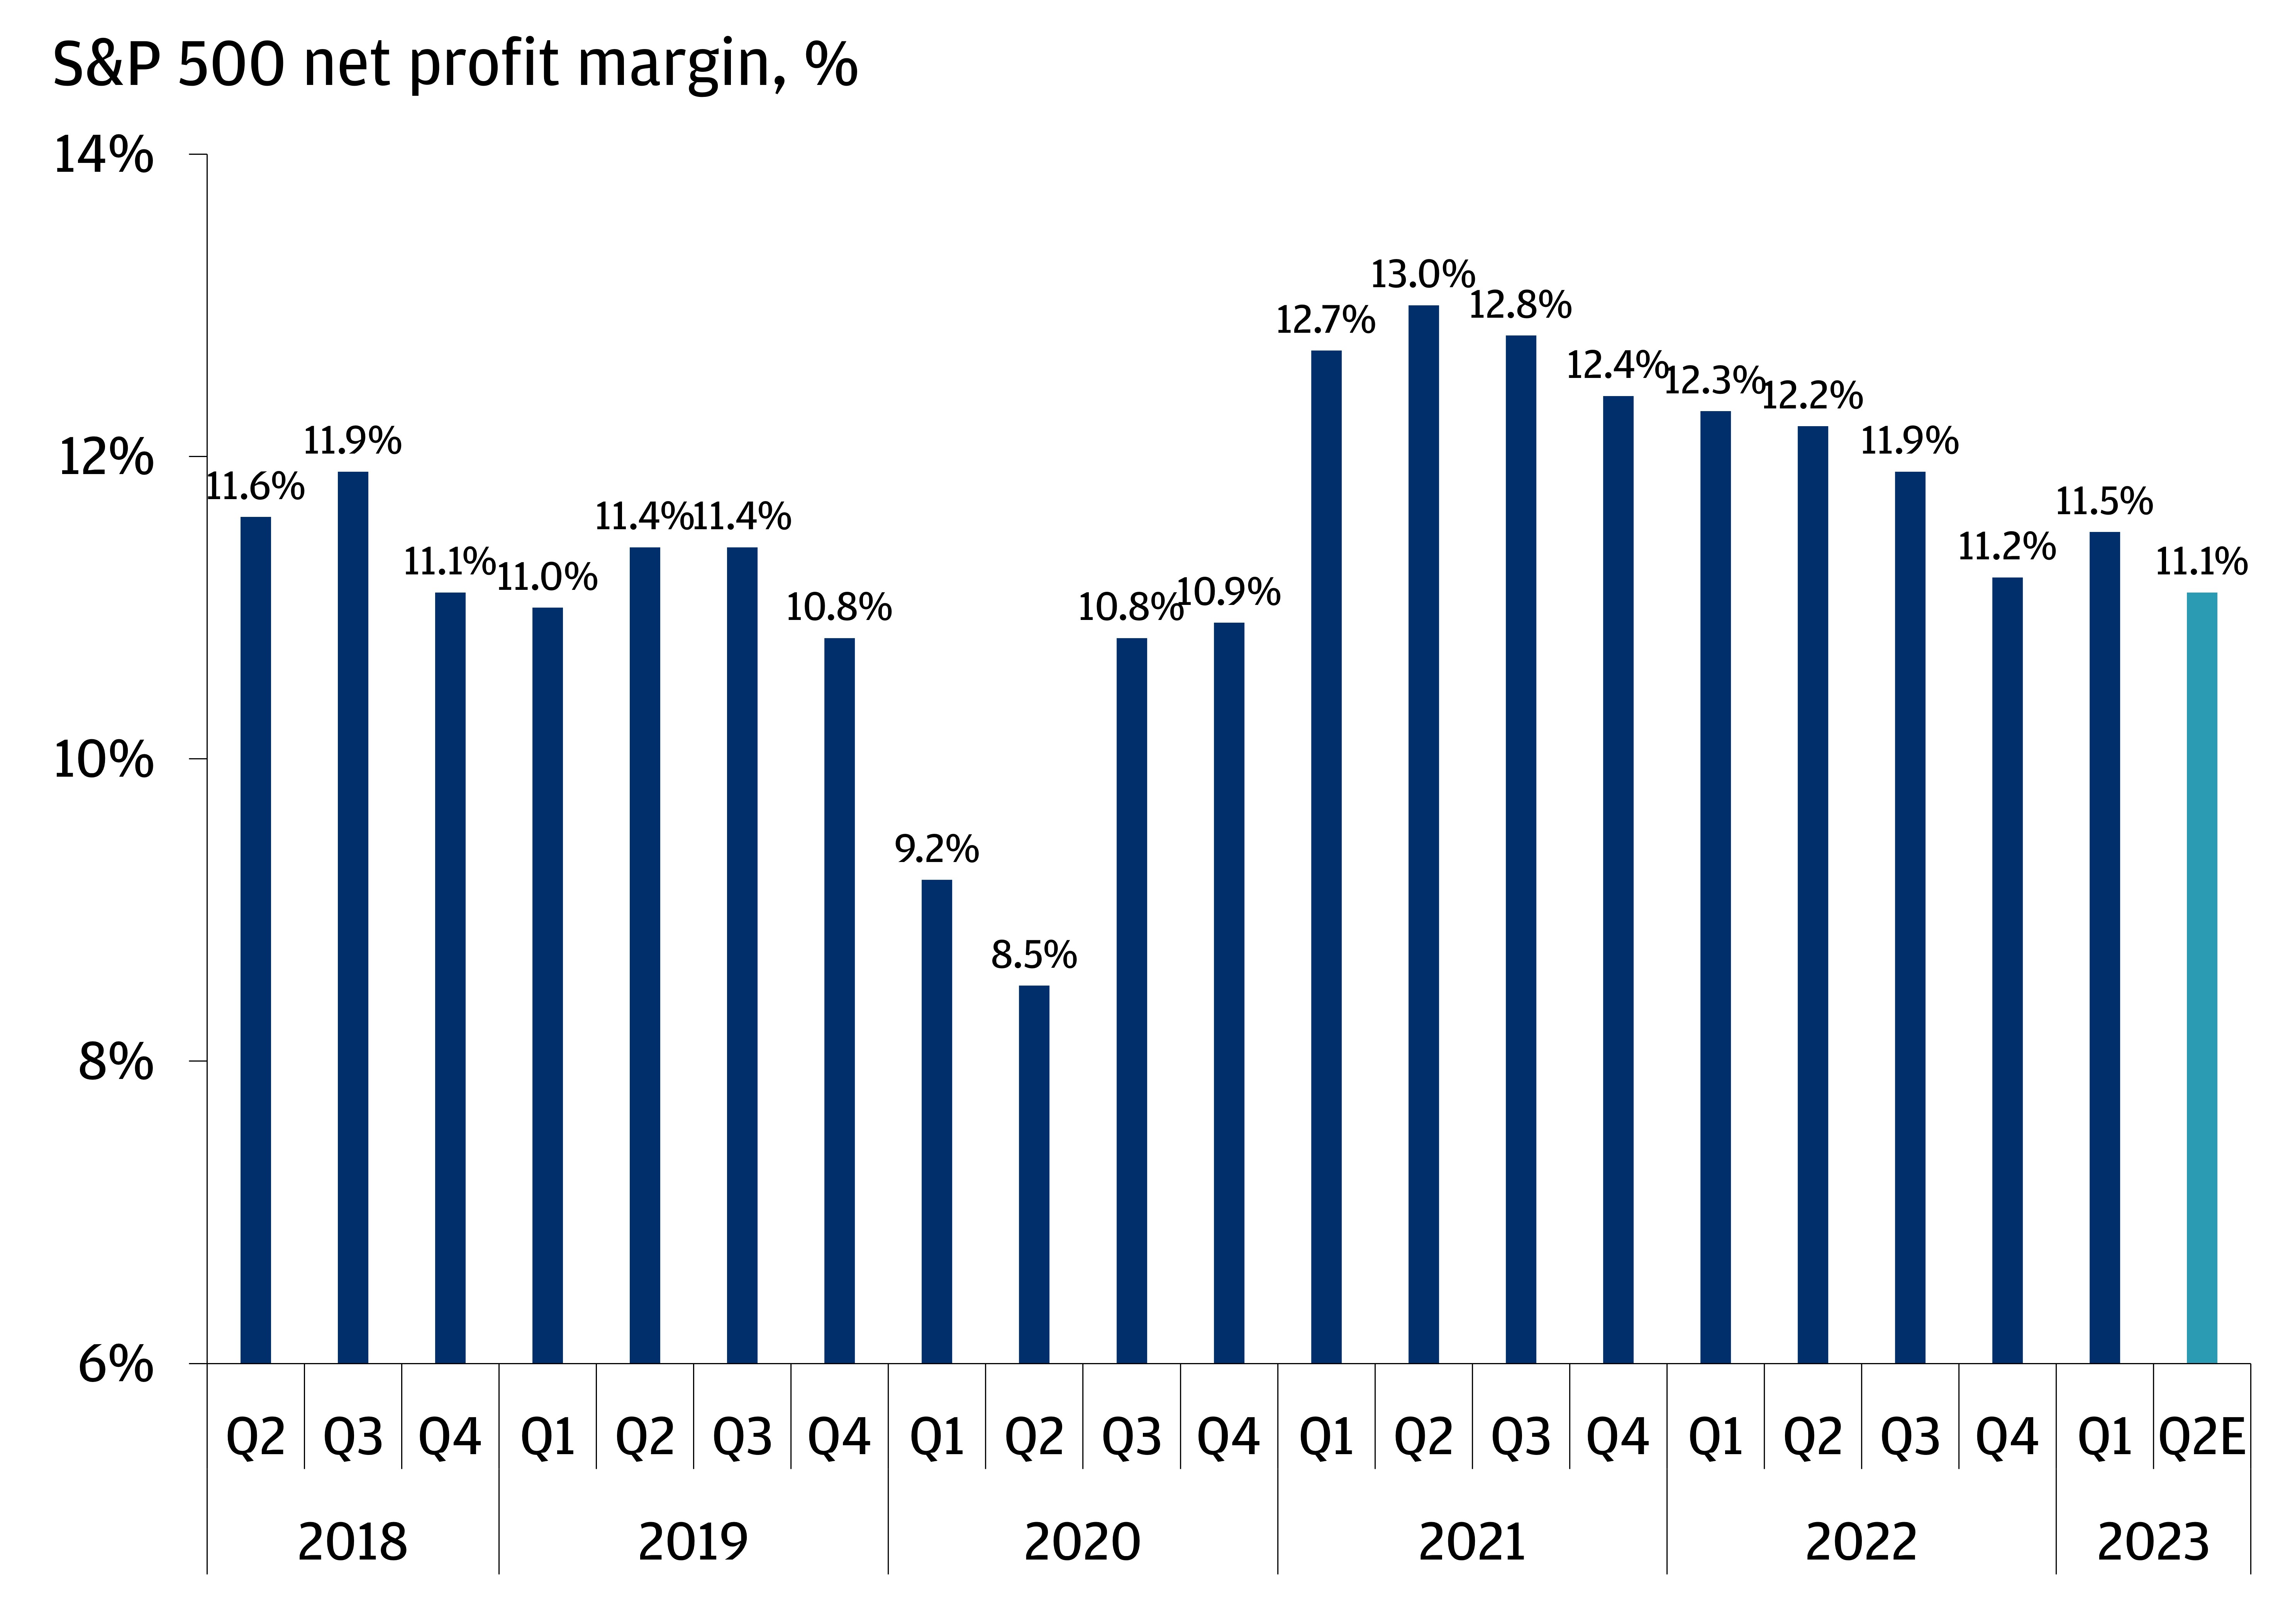 This chart shows S&P 500 net profit margins from Q2 2018 to Q2 2023 (Q2 2023 value is estimated from FactSet).